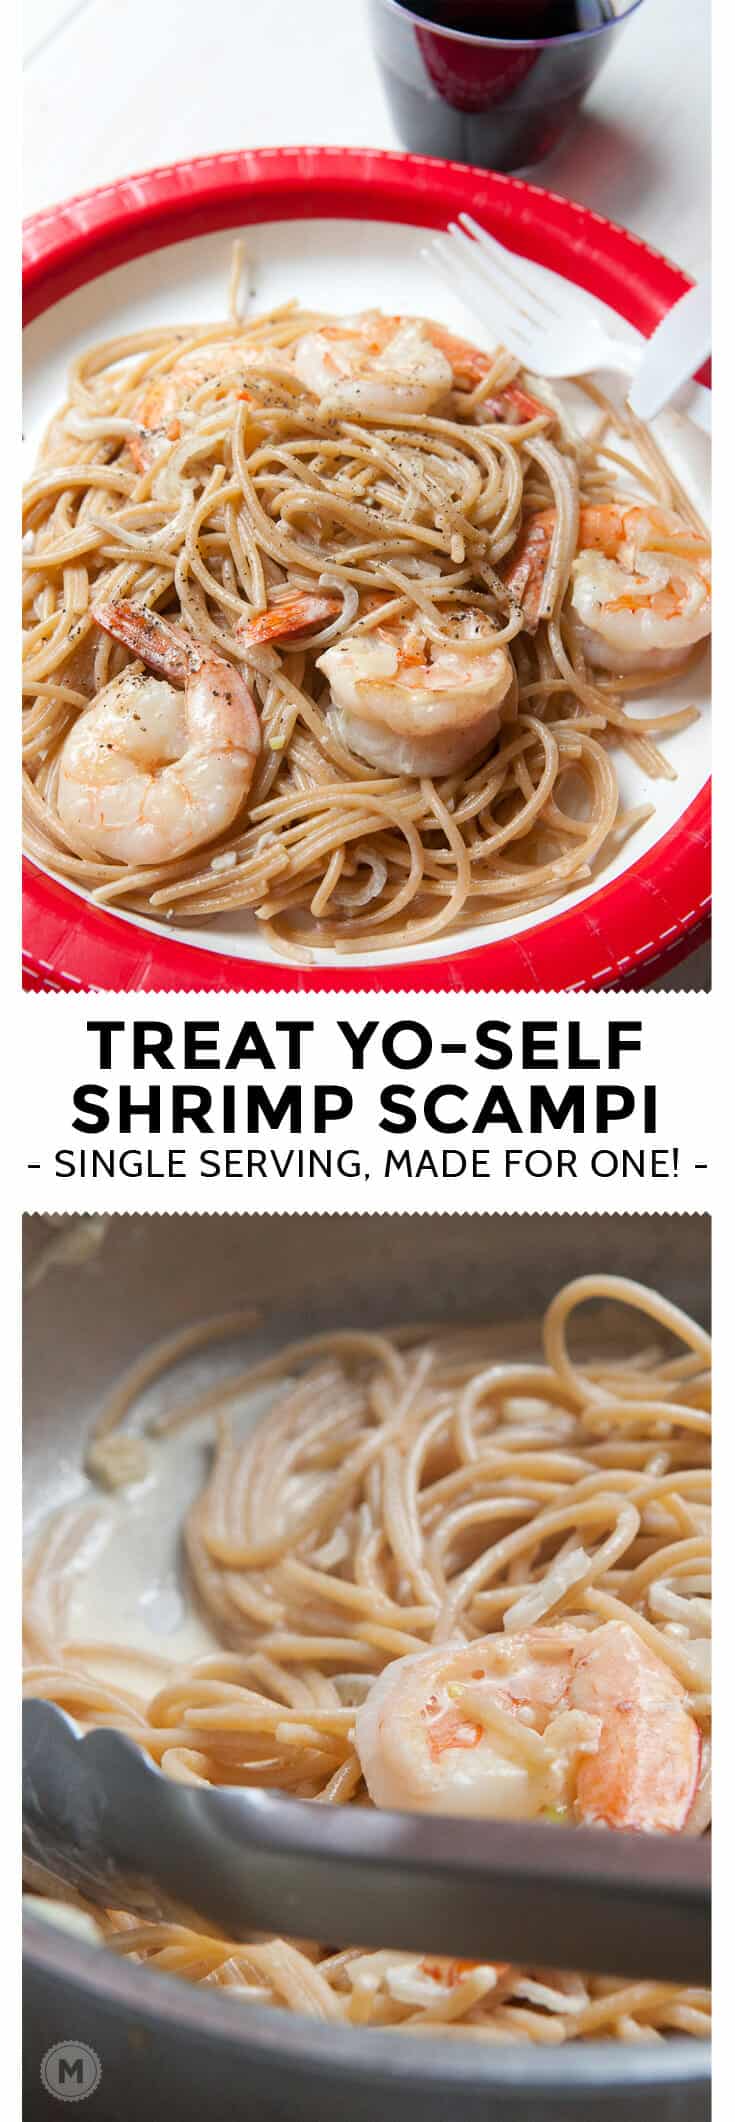 Shrimp Scampi for One! Just because you are eating solo or in a hurry, doesn't mean you can't class it up! Here's my single pot, single serving shrimp scampi recipe! | macheesmo.com